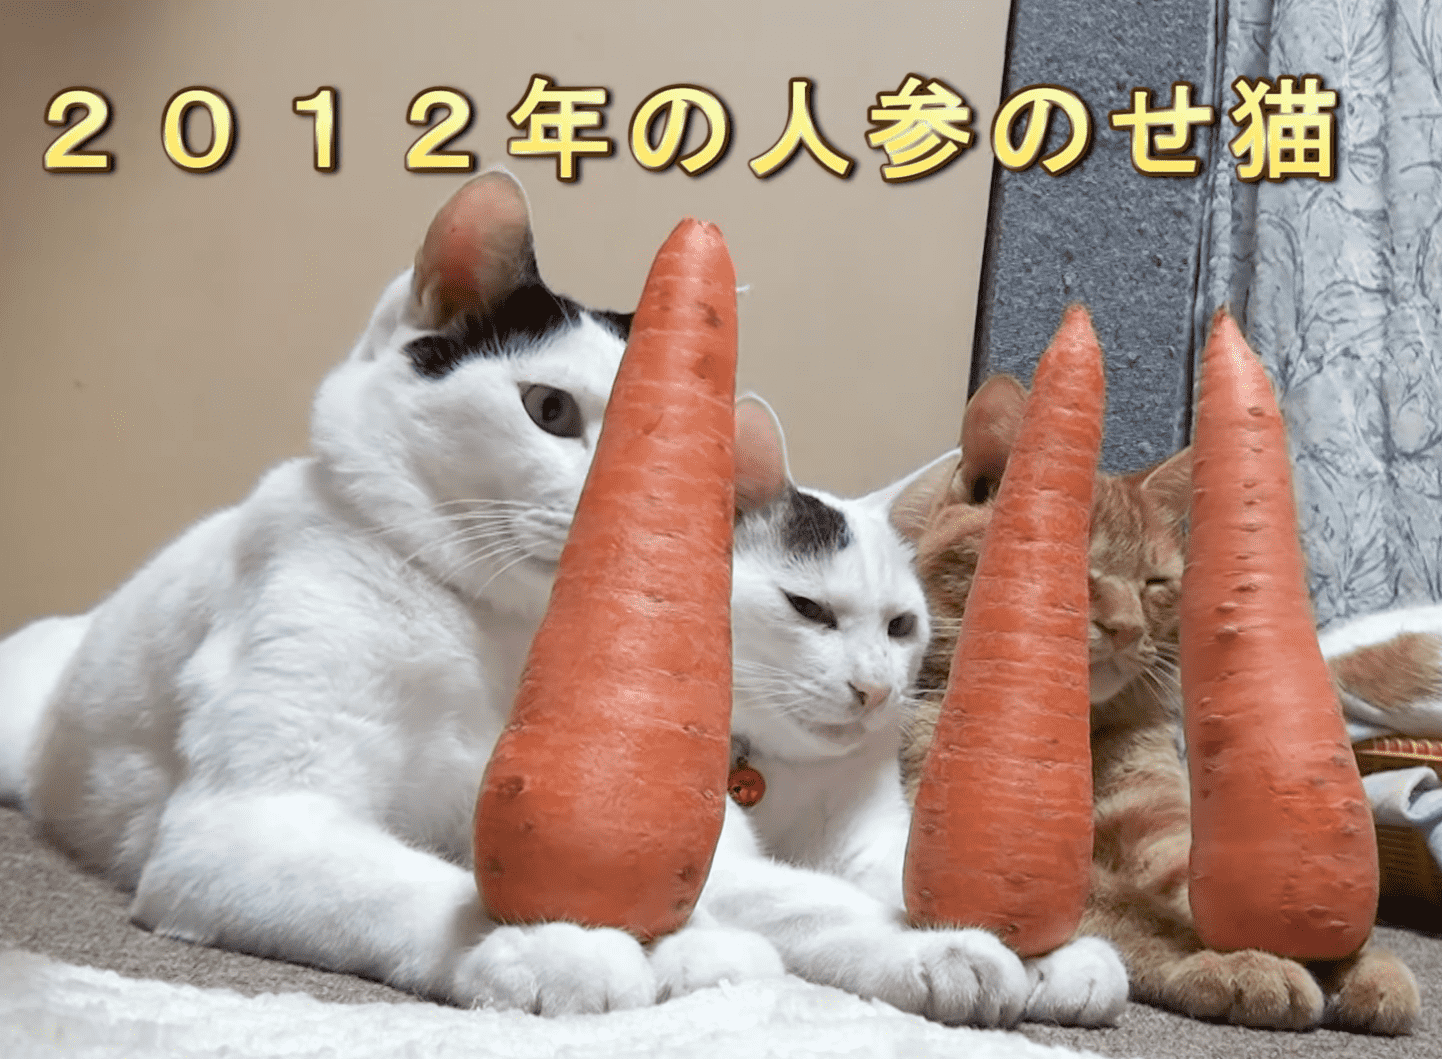 Cats with Carrots 😺🥕